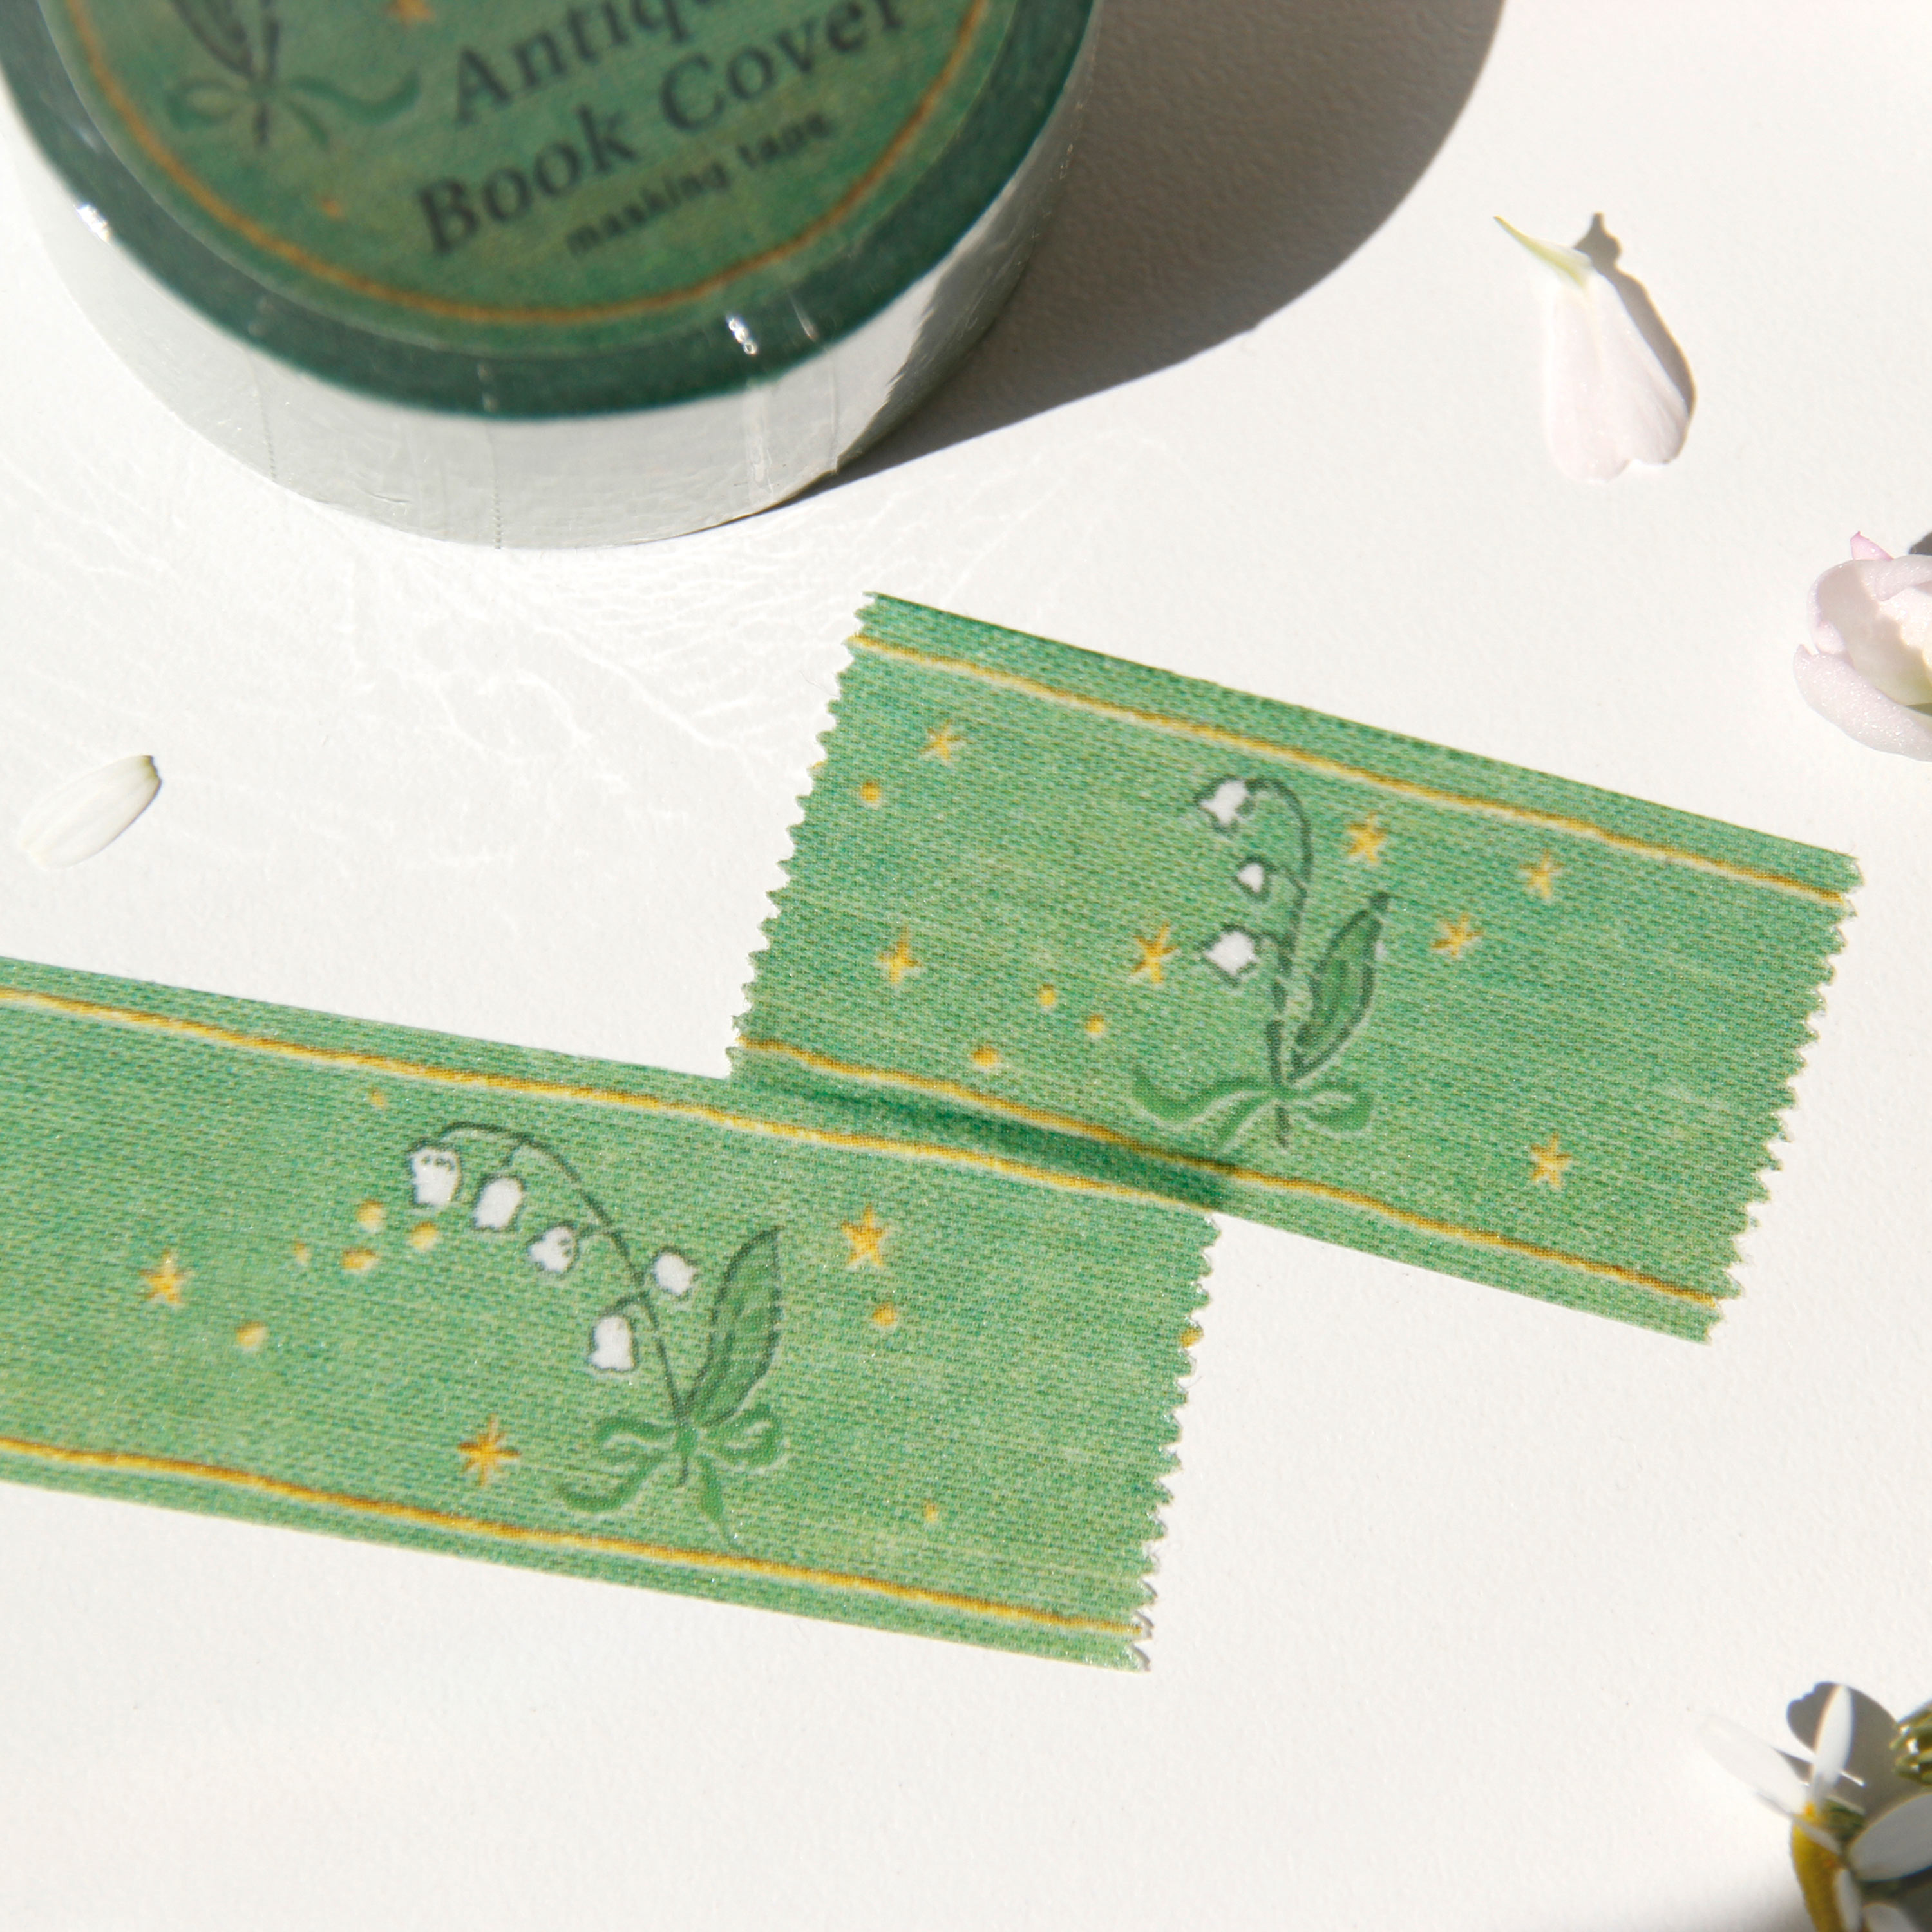 Antique Book Cover Masking Tape [May Lily]